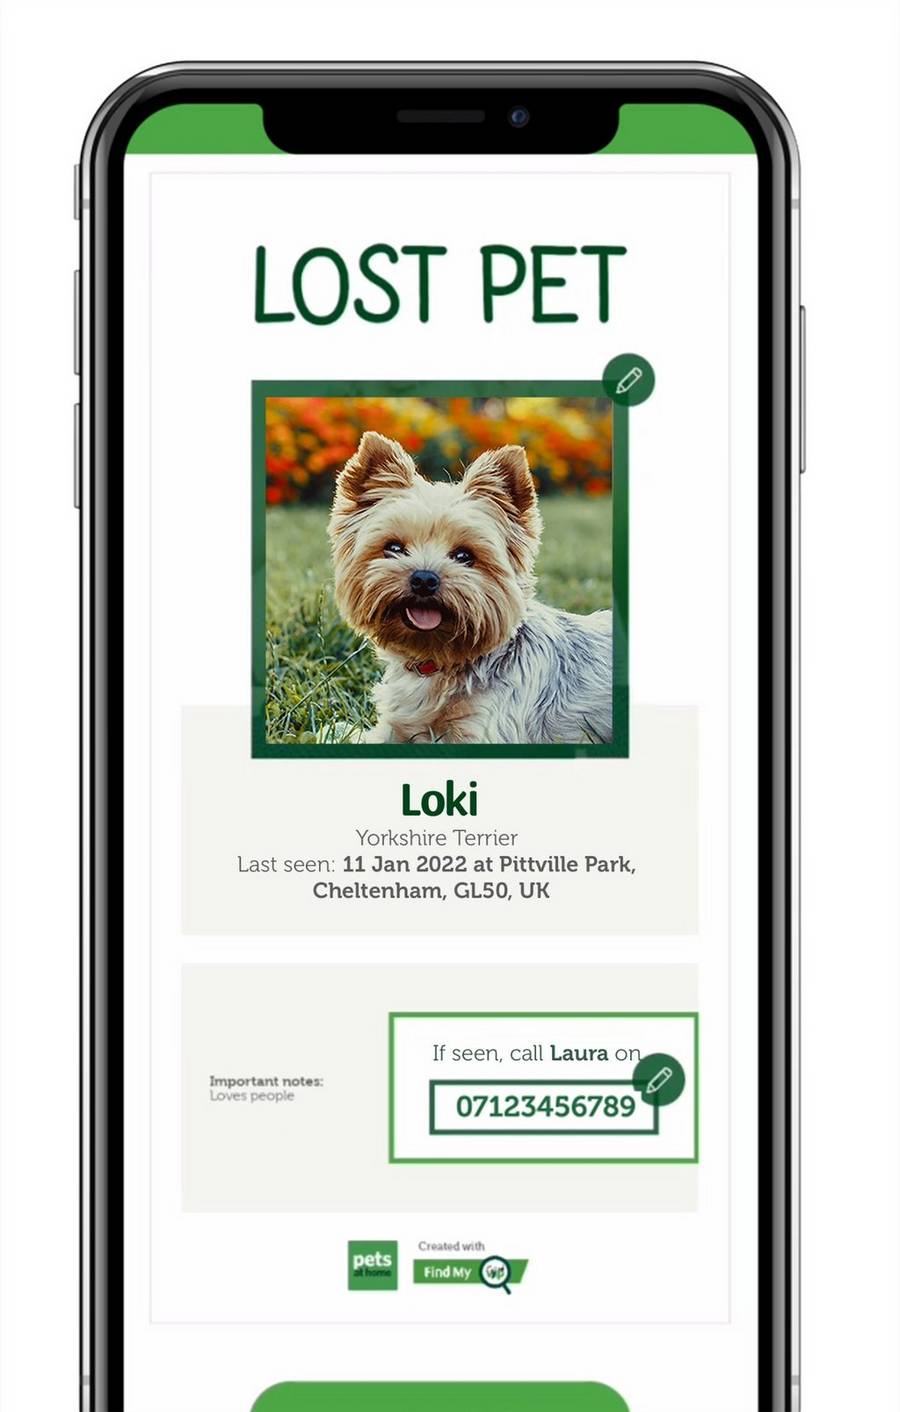 how would you feel if your pet went missing?